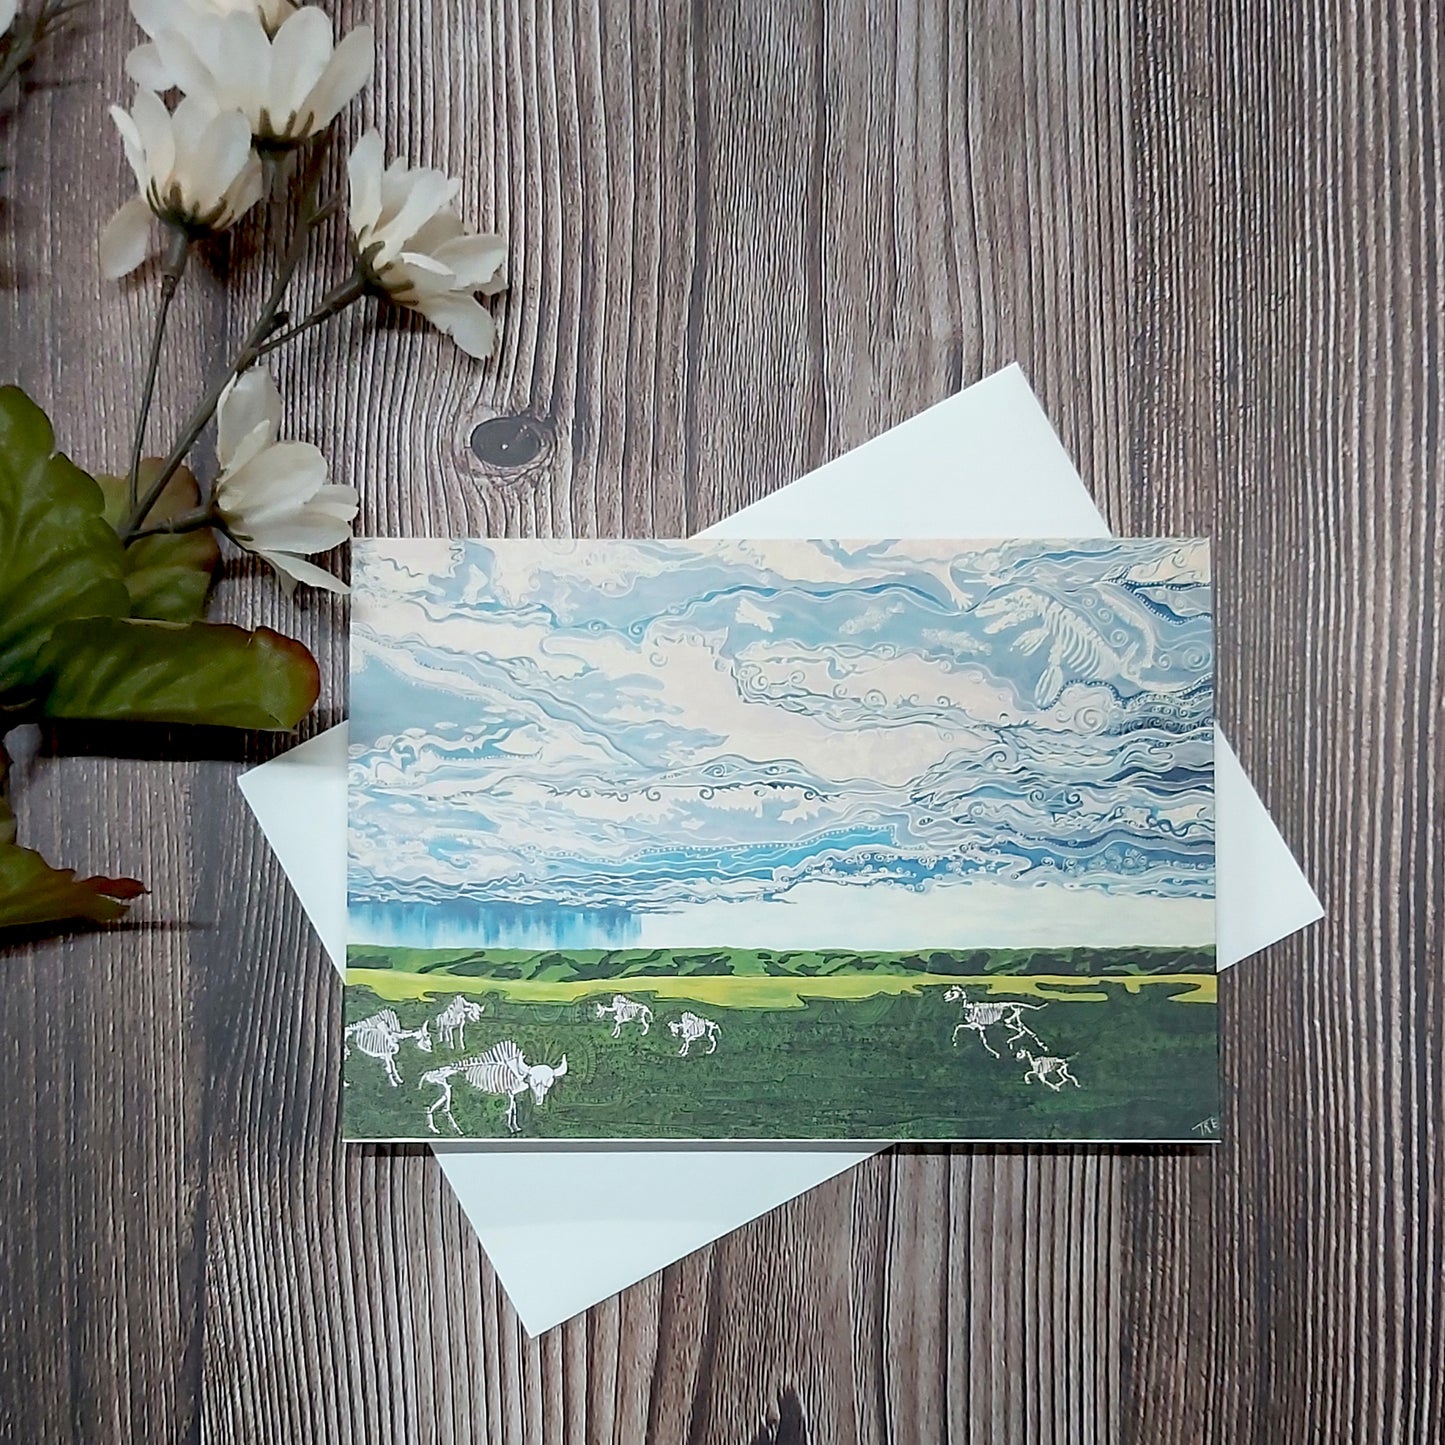 Greeting Card, Blank Inside, 4x6 - "The Sky and Land Speak"